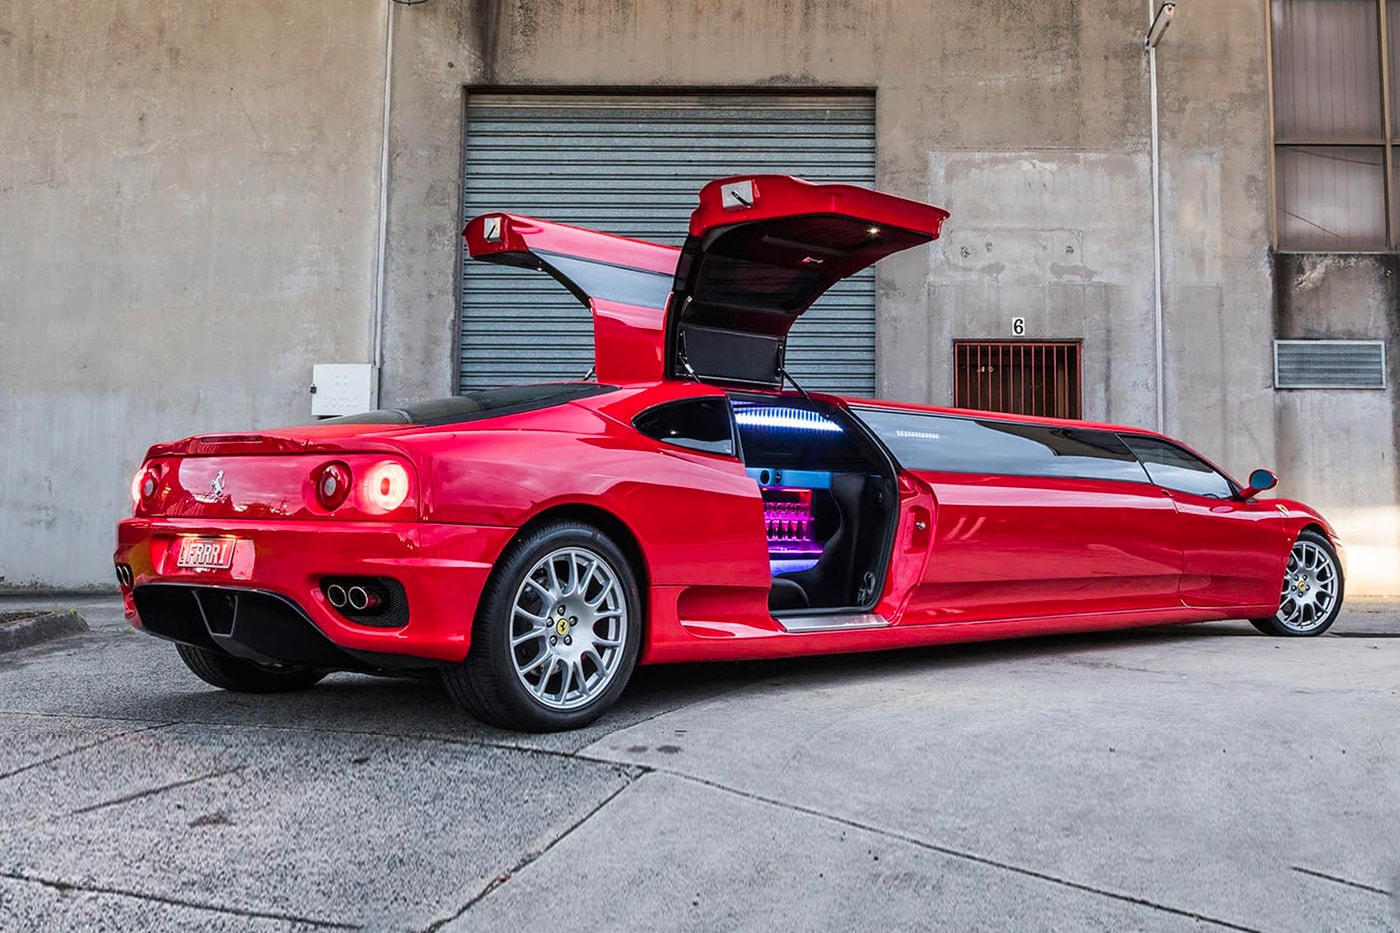 https://image-cdn.hypb.st/https%3A%2F%2Fhypebeast.com%2Fimage%2F2020%2F08%2Fa-2003-ferrari-360-modena-stretch-limo-is-now-up-for-sale-002.jpg?cbr=1&q=90